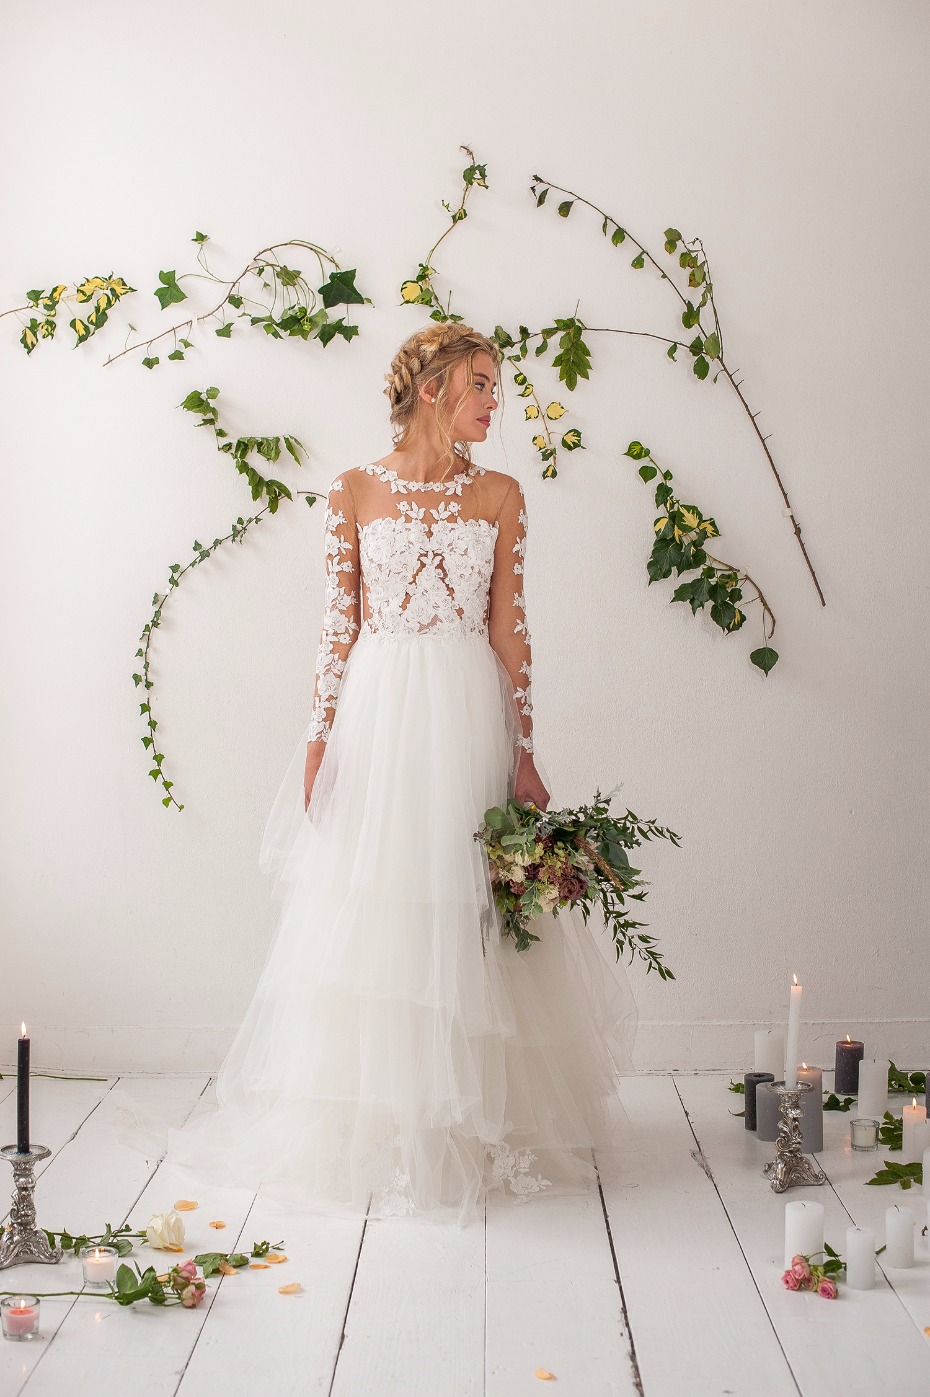 Tulle and lace wedding dress from Olvi's